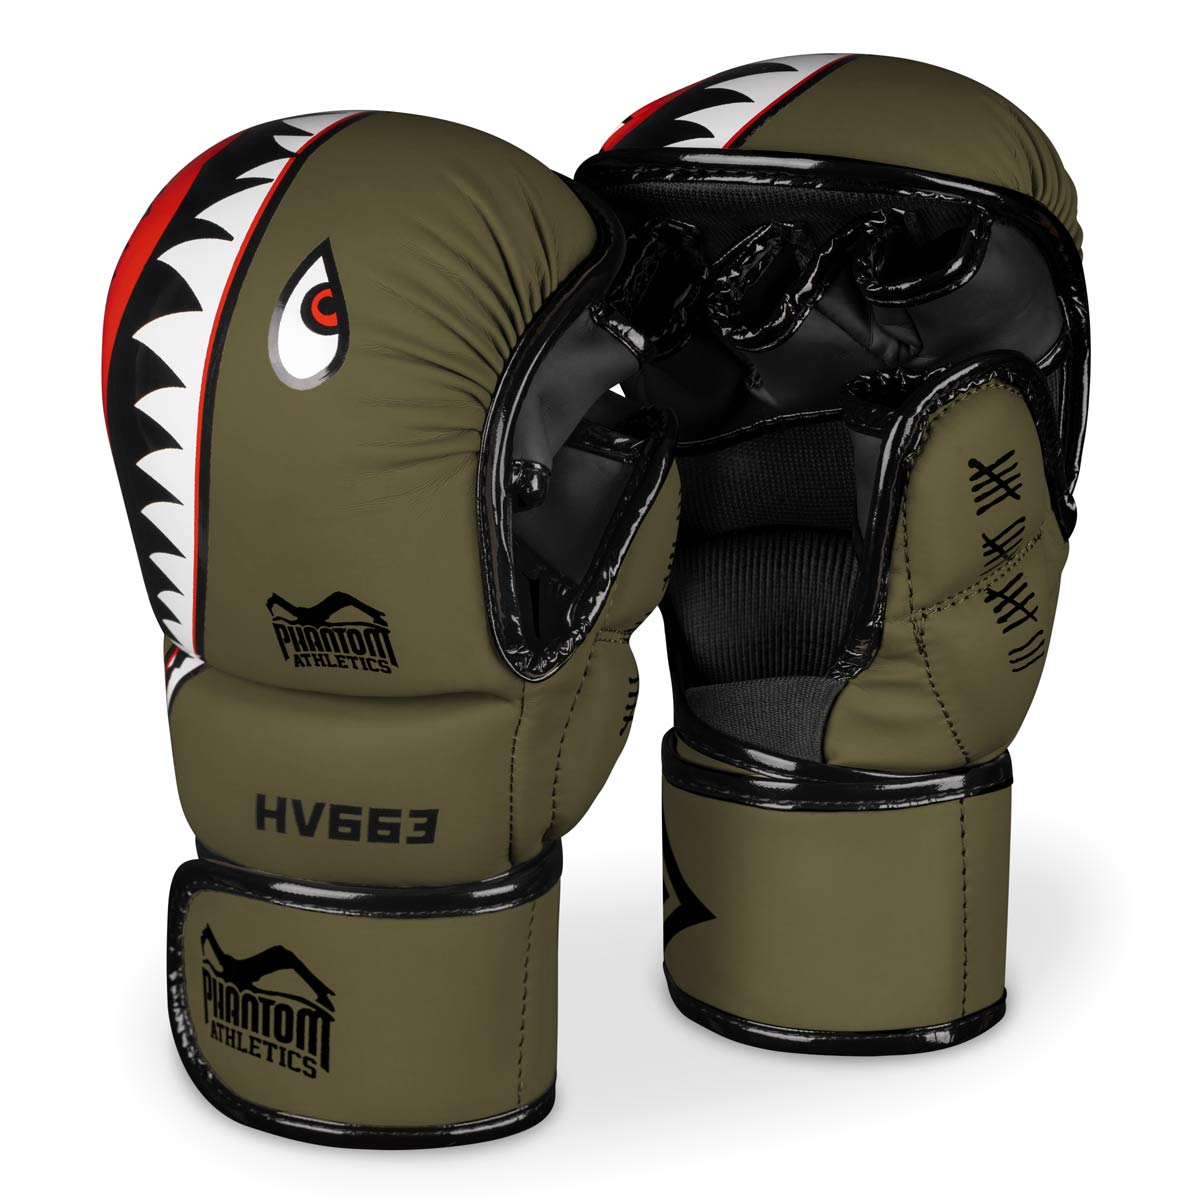 Buy MMA Equipment Online - Gloves, Pads, Mouth Guards, Vests